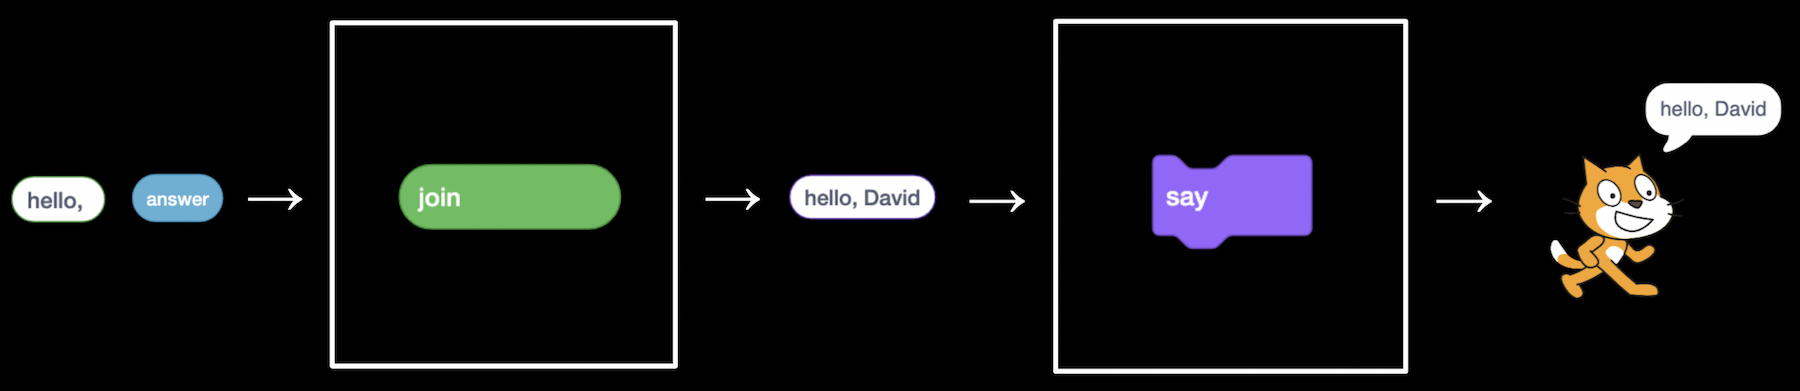 hello, answer blocks as inputs to join block, then output of hello, David as input to say block, then output of cat with speech bubble